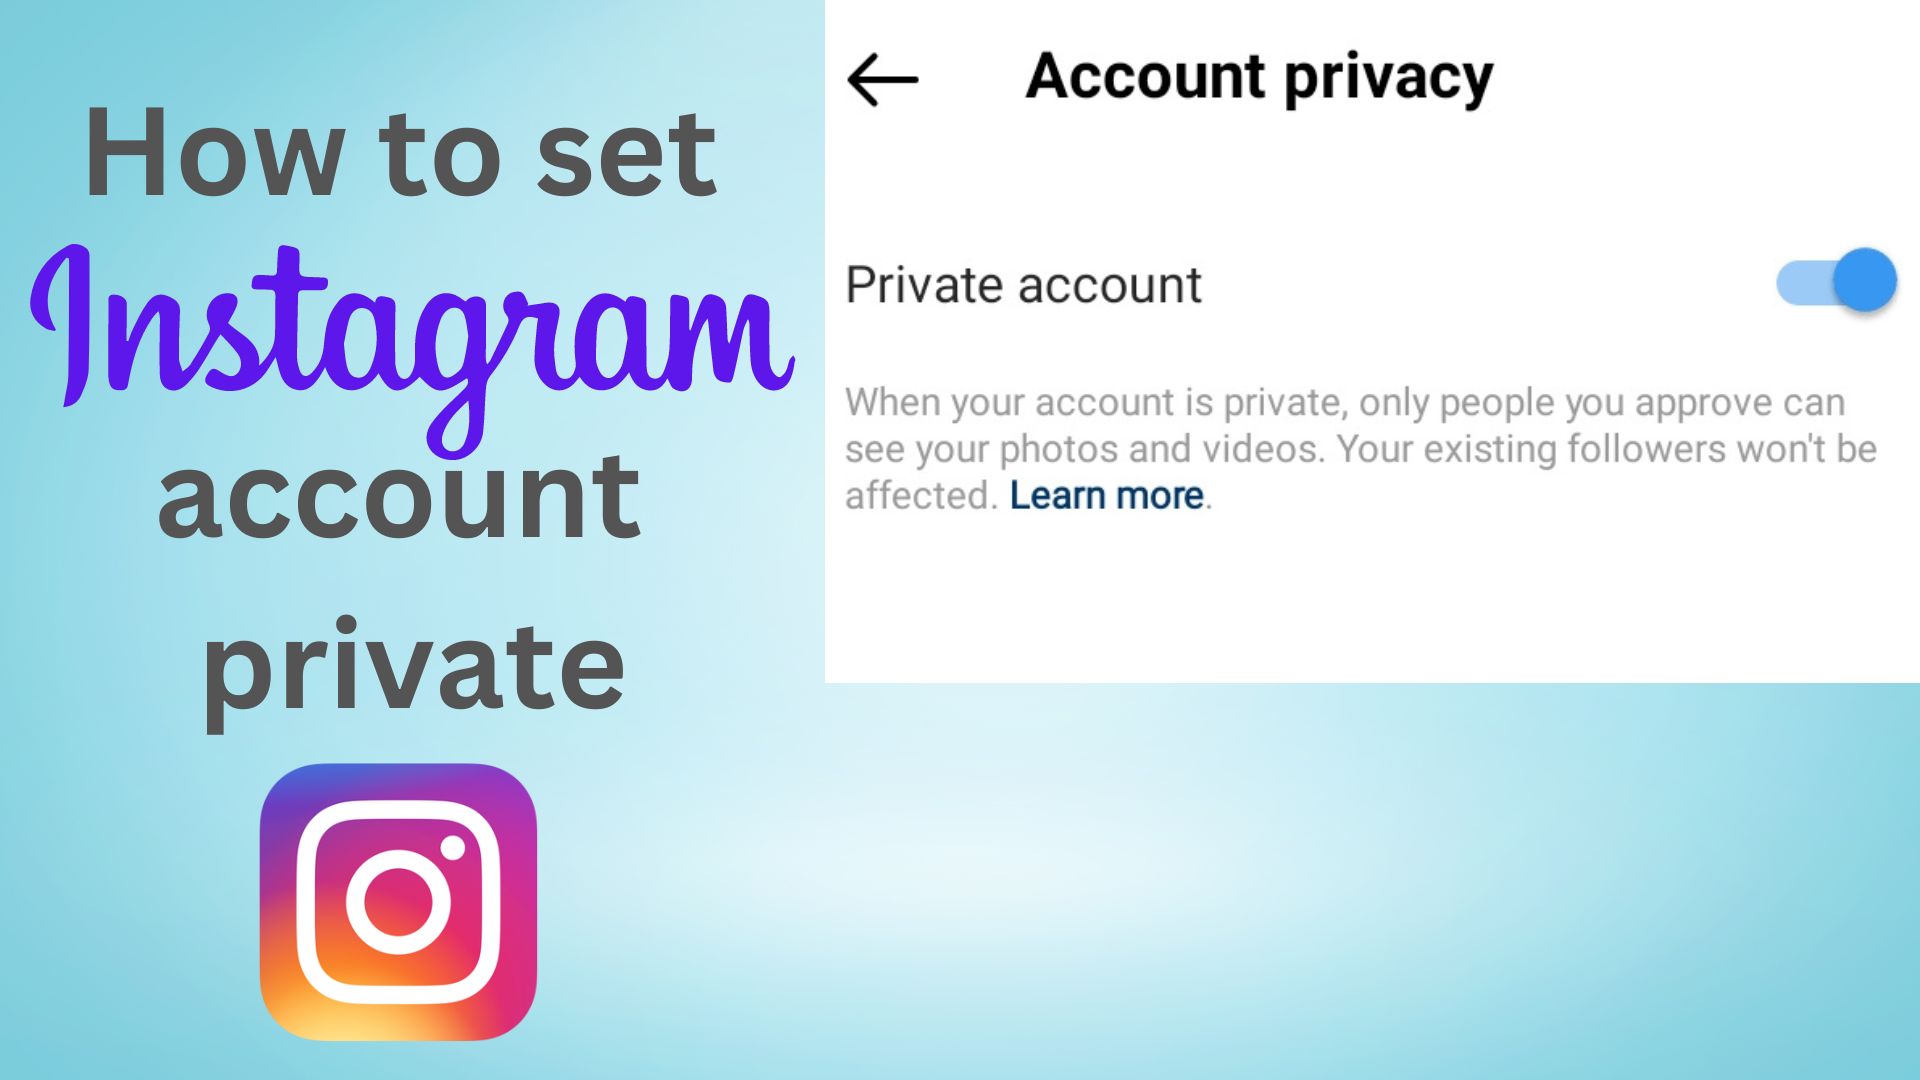 How to set Instagram account private